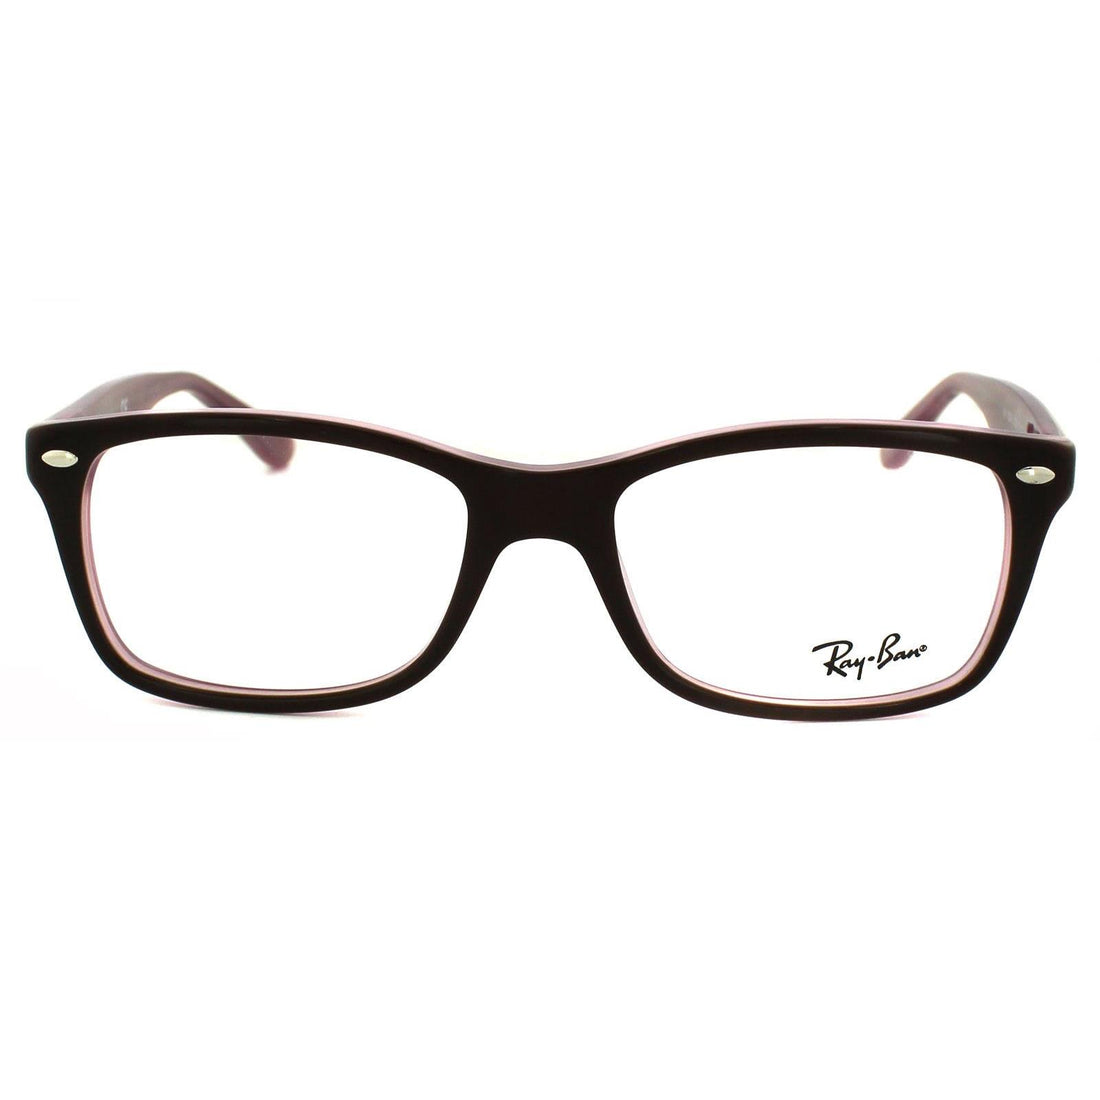 Ray-Ban 5228 Glasses Top Brown on Opal Pink 53